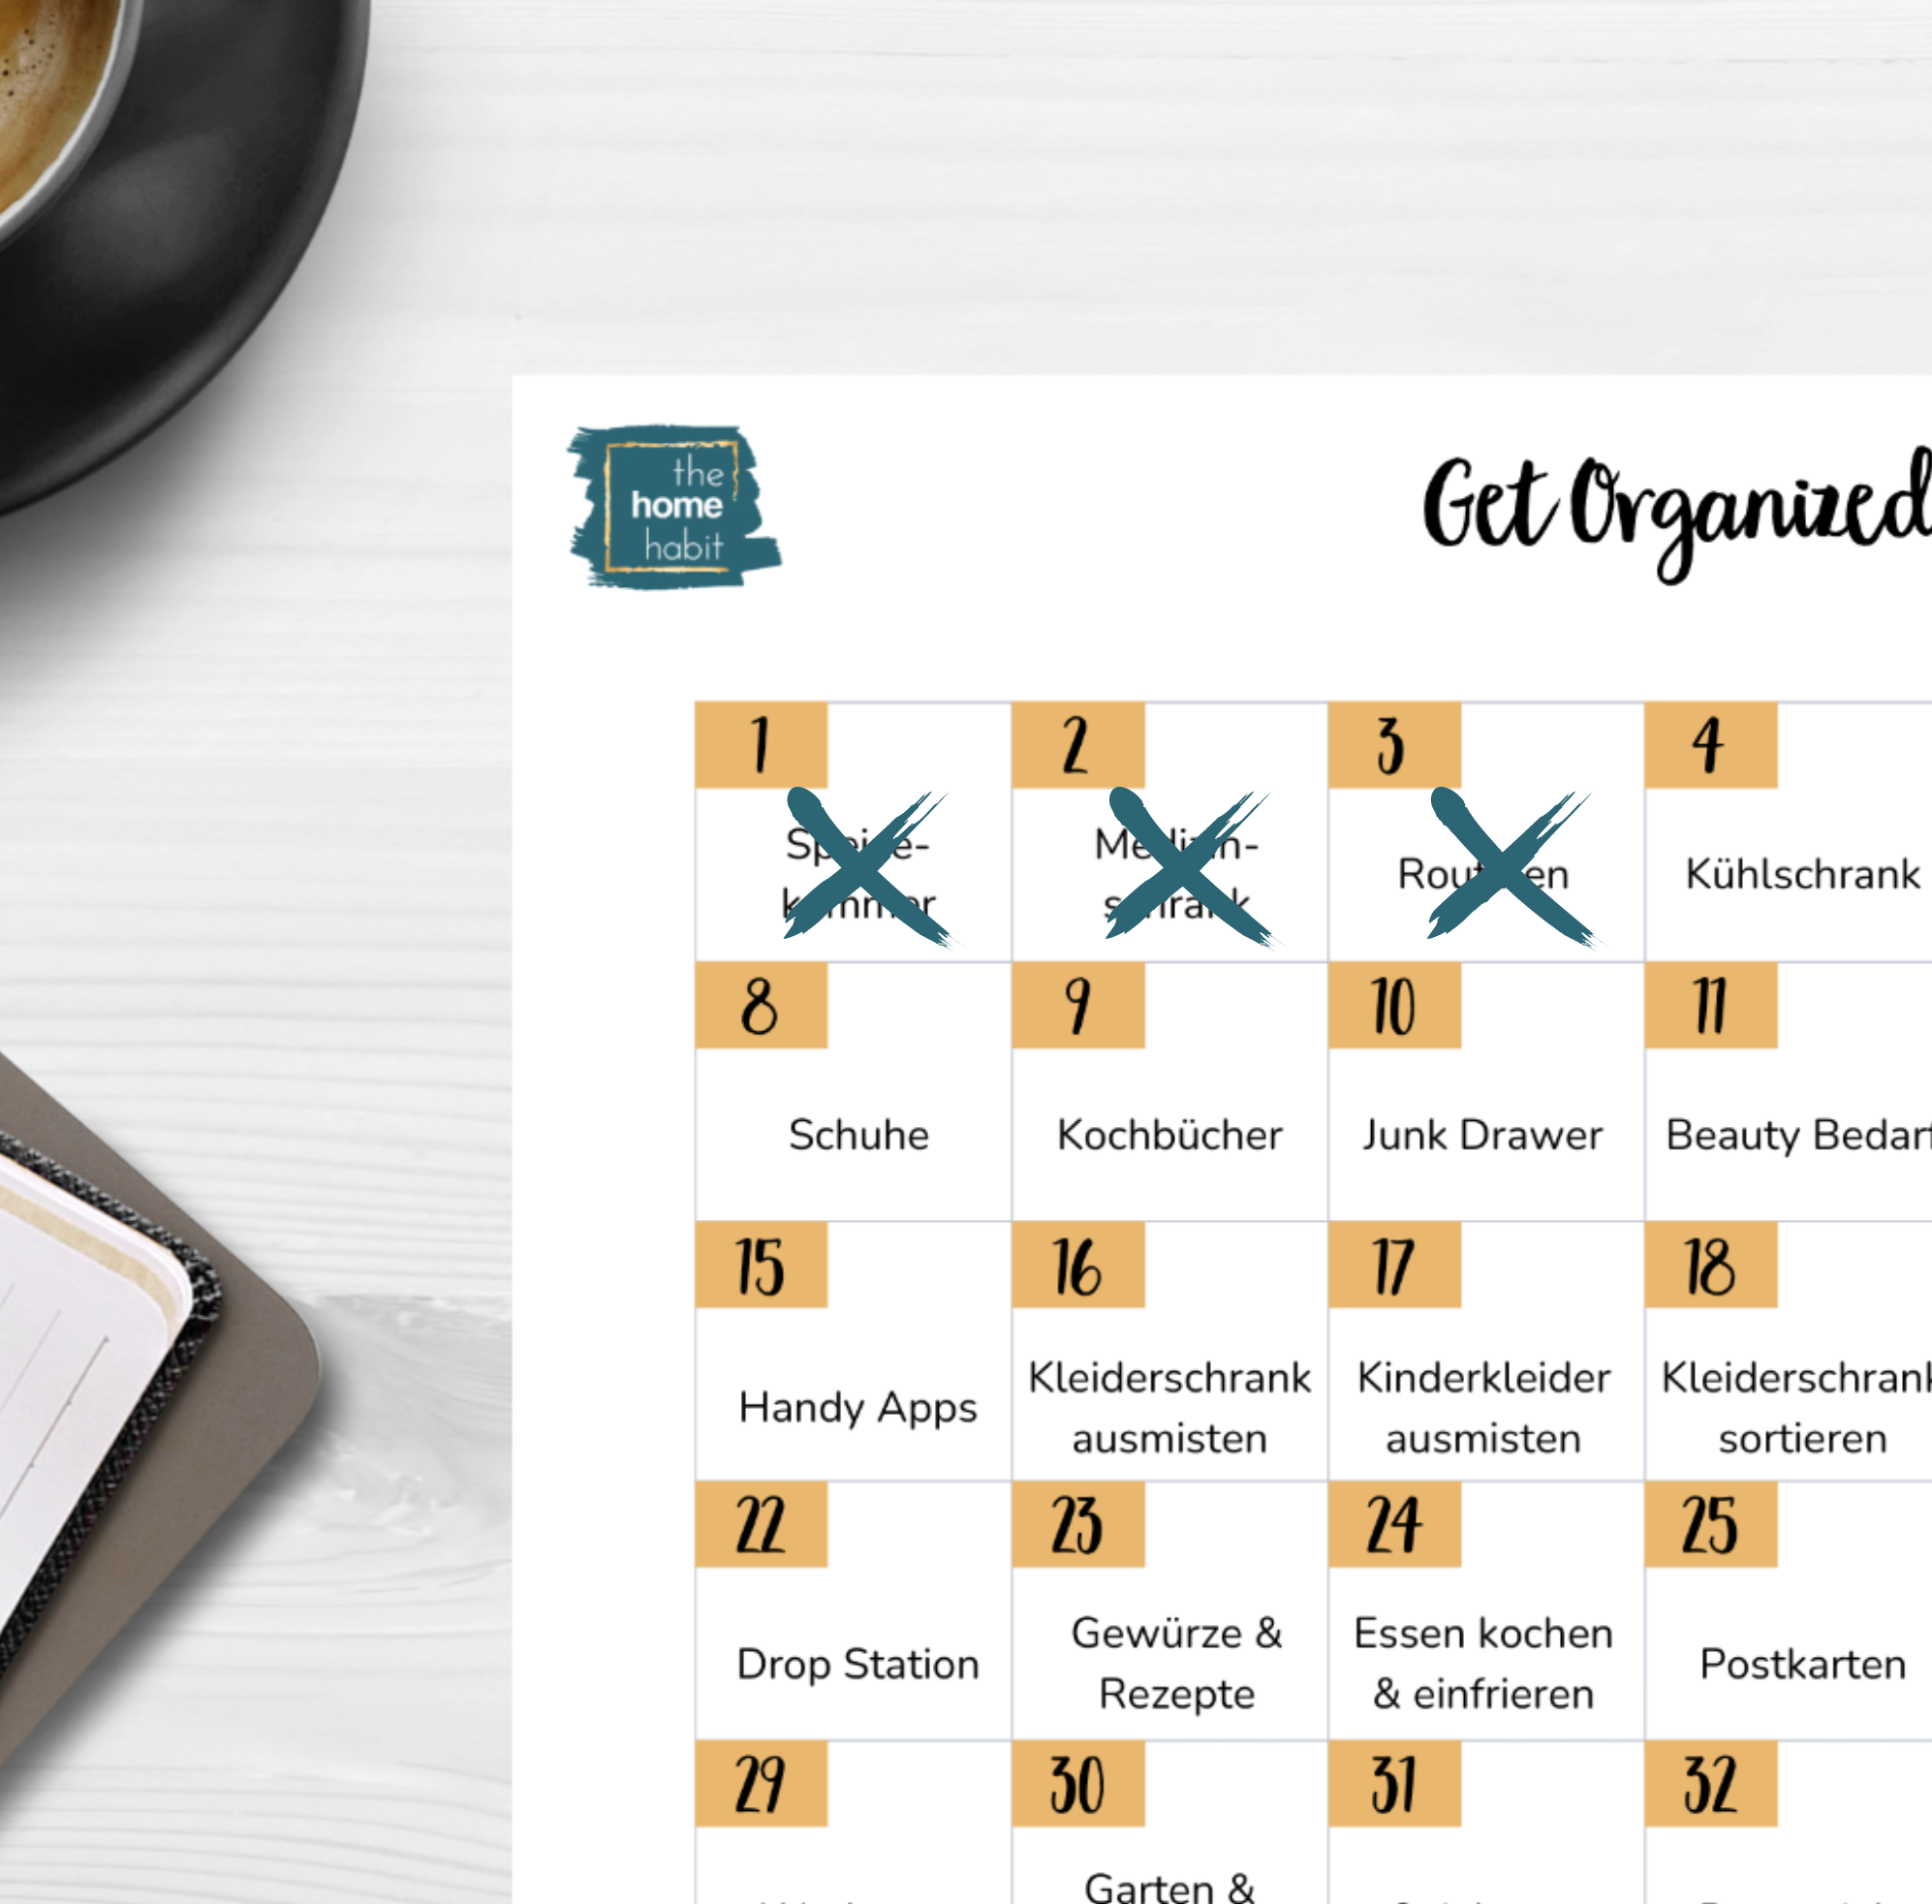 Get Organized Guide